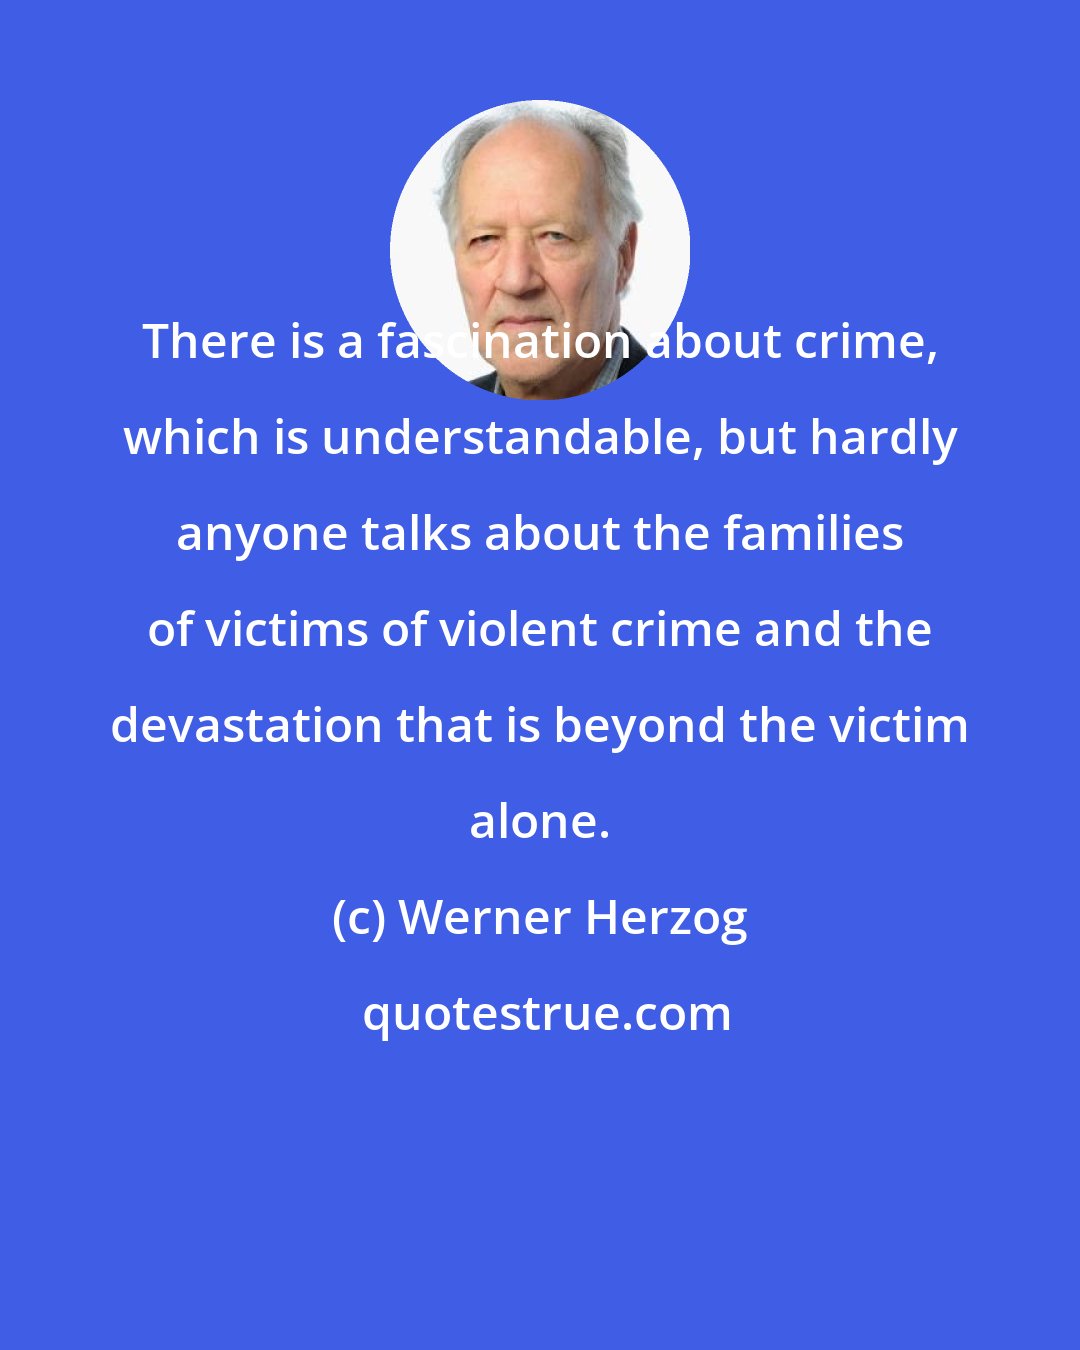 Werner Herzog: There is a fascination about crime, which is understandable, but hardly anyone talks about the families of victims of violent crime and the devastation that is beyond the victim alone.